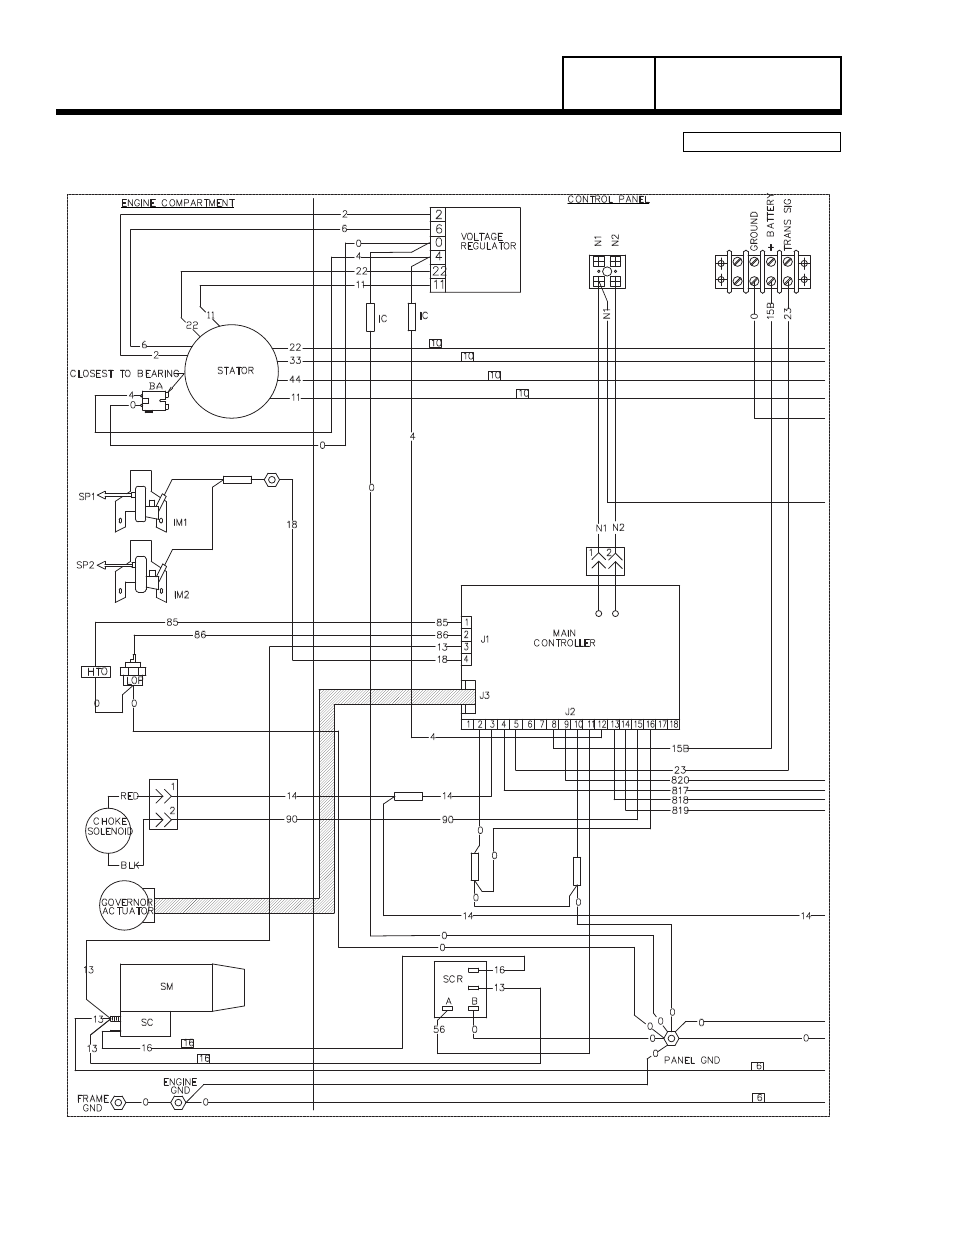 Wiring Diagram  14 Kw Home Standby  Group G  Part 7